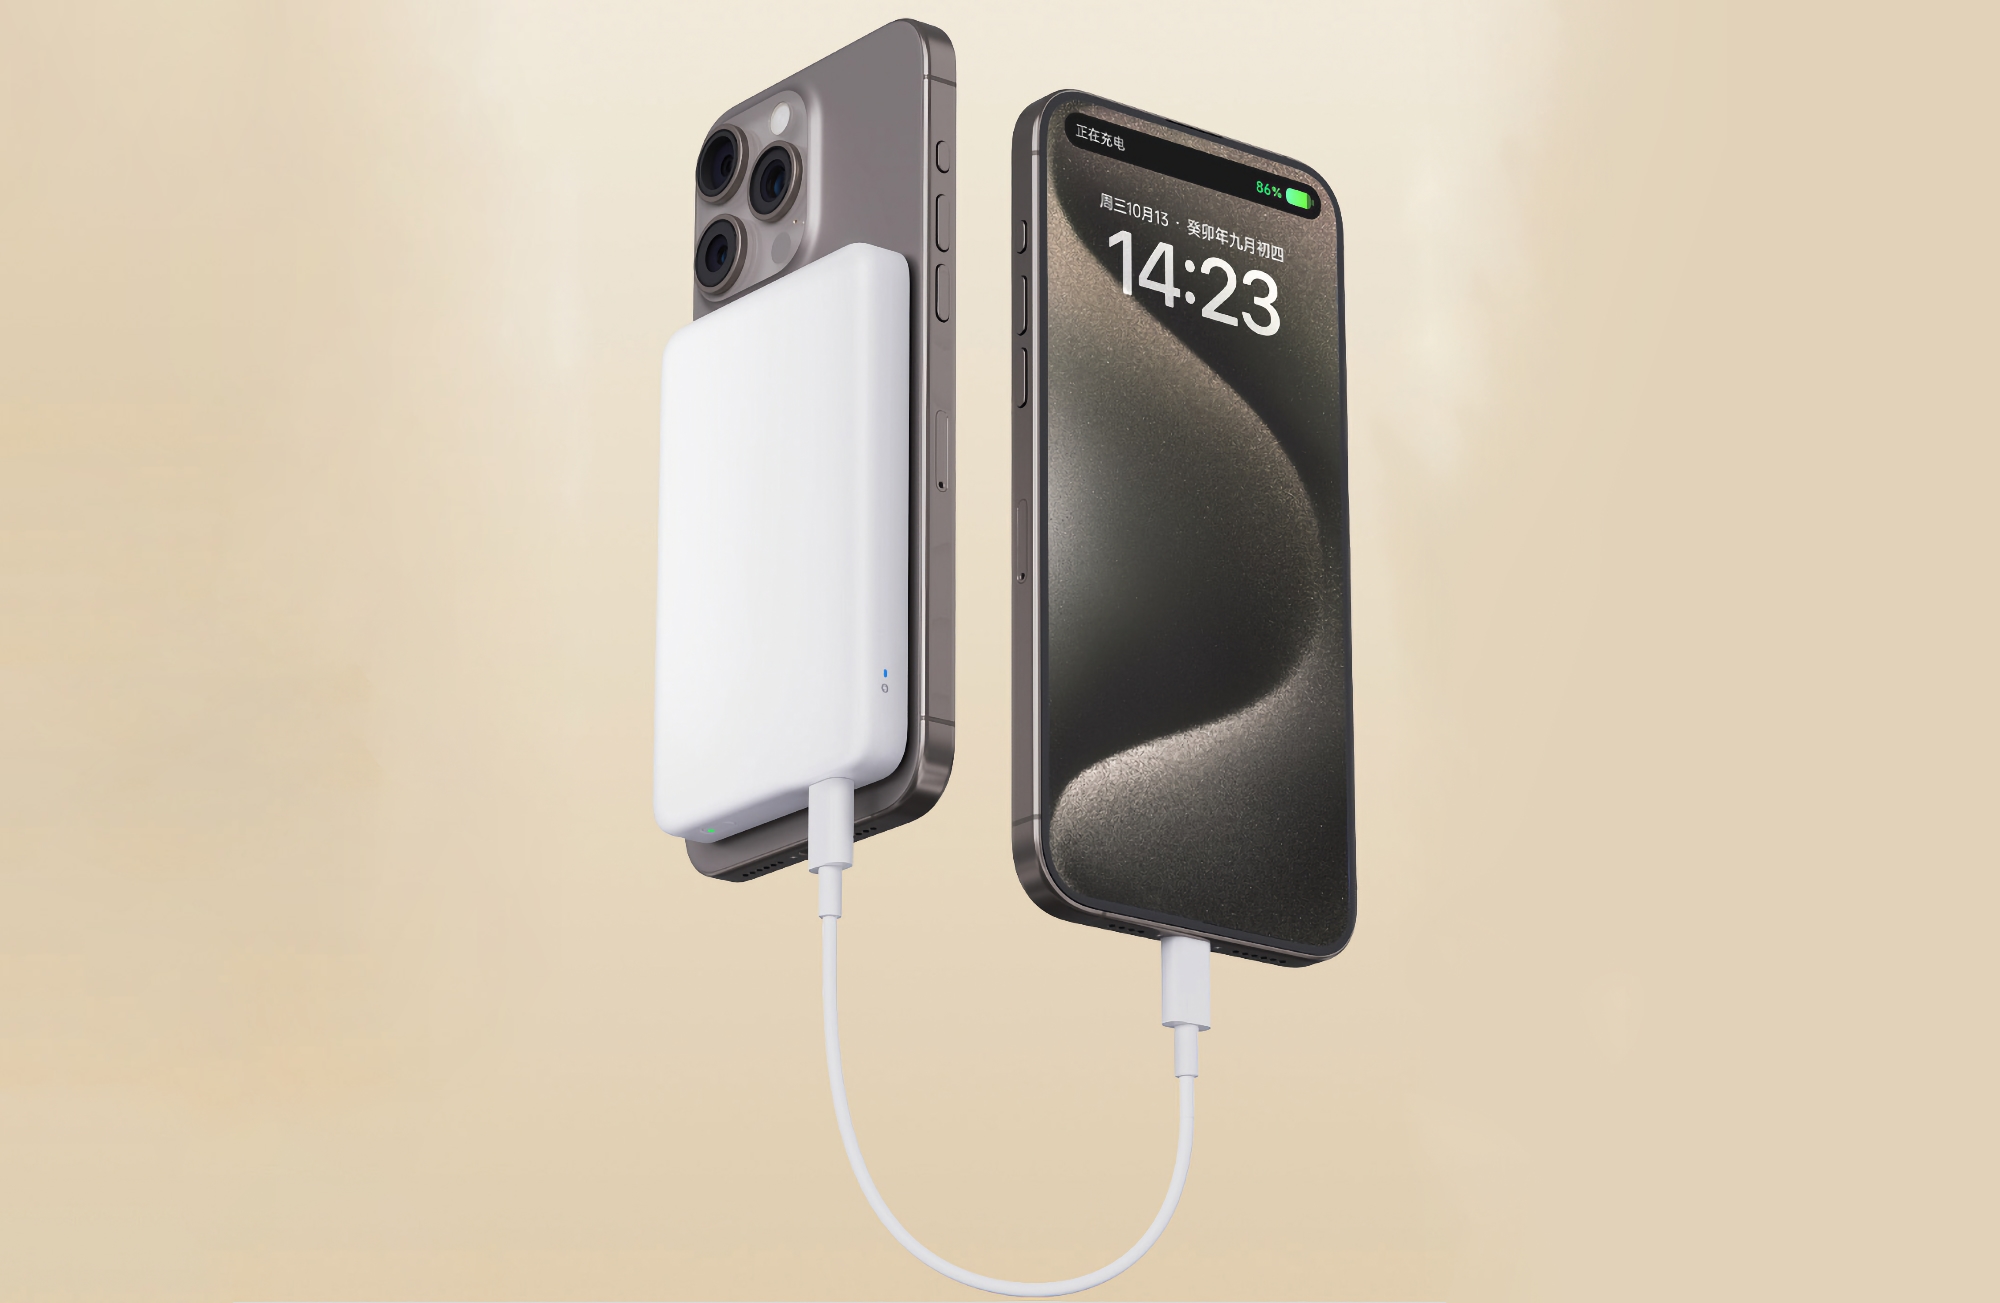 Xiaomi has unveiled a new 5,000mAh magnetic battery with up to 20W of power for $18